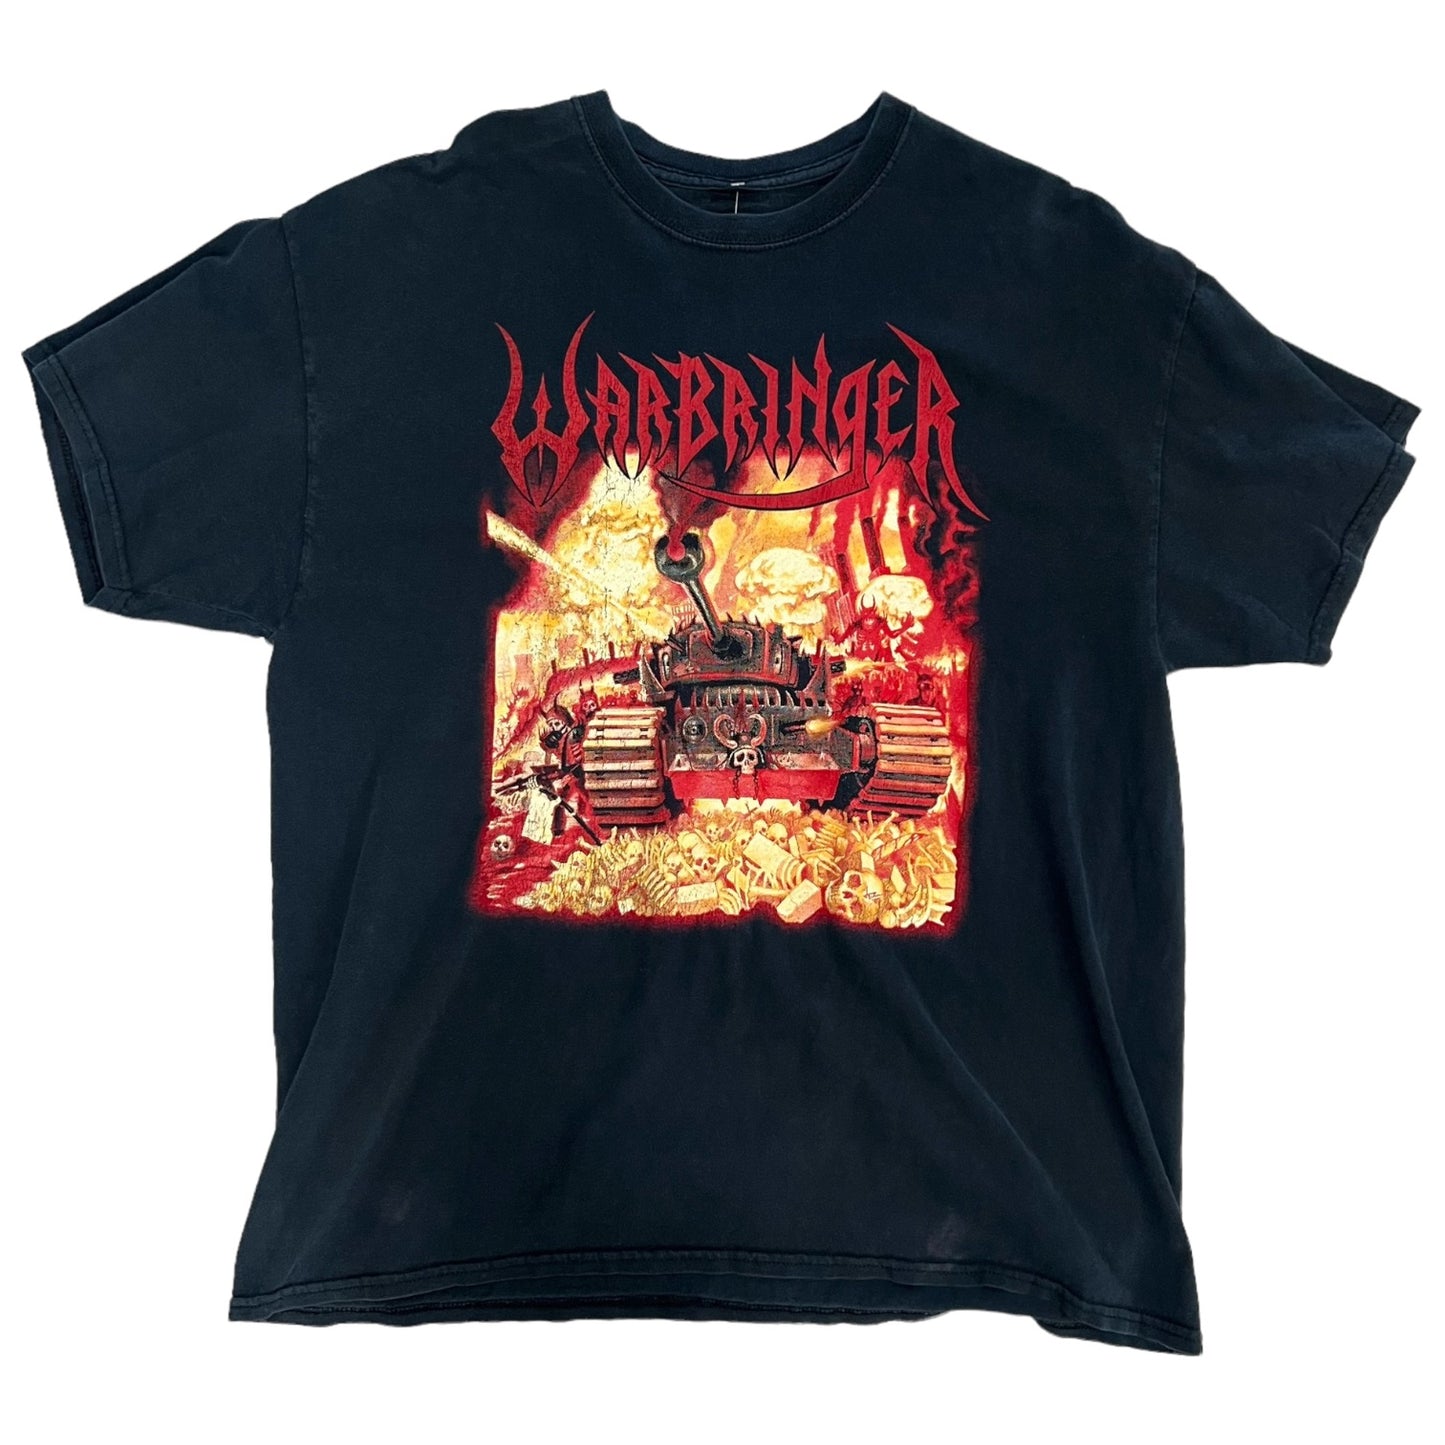 2000's Warbringer "War without end tour" tee